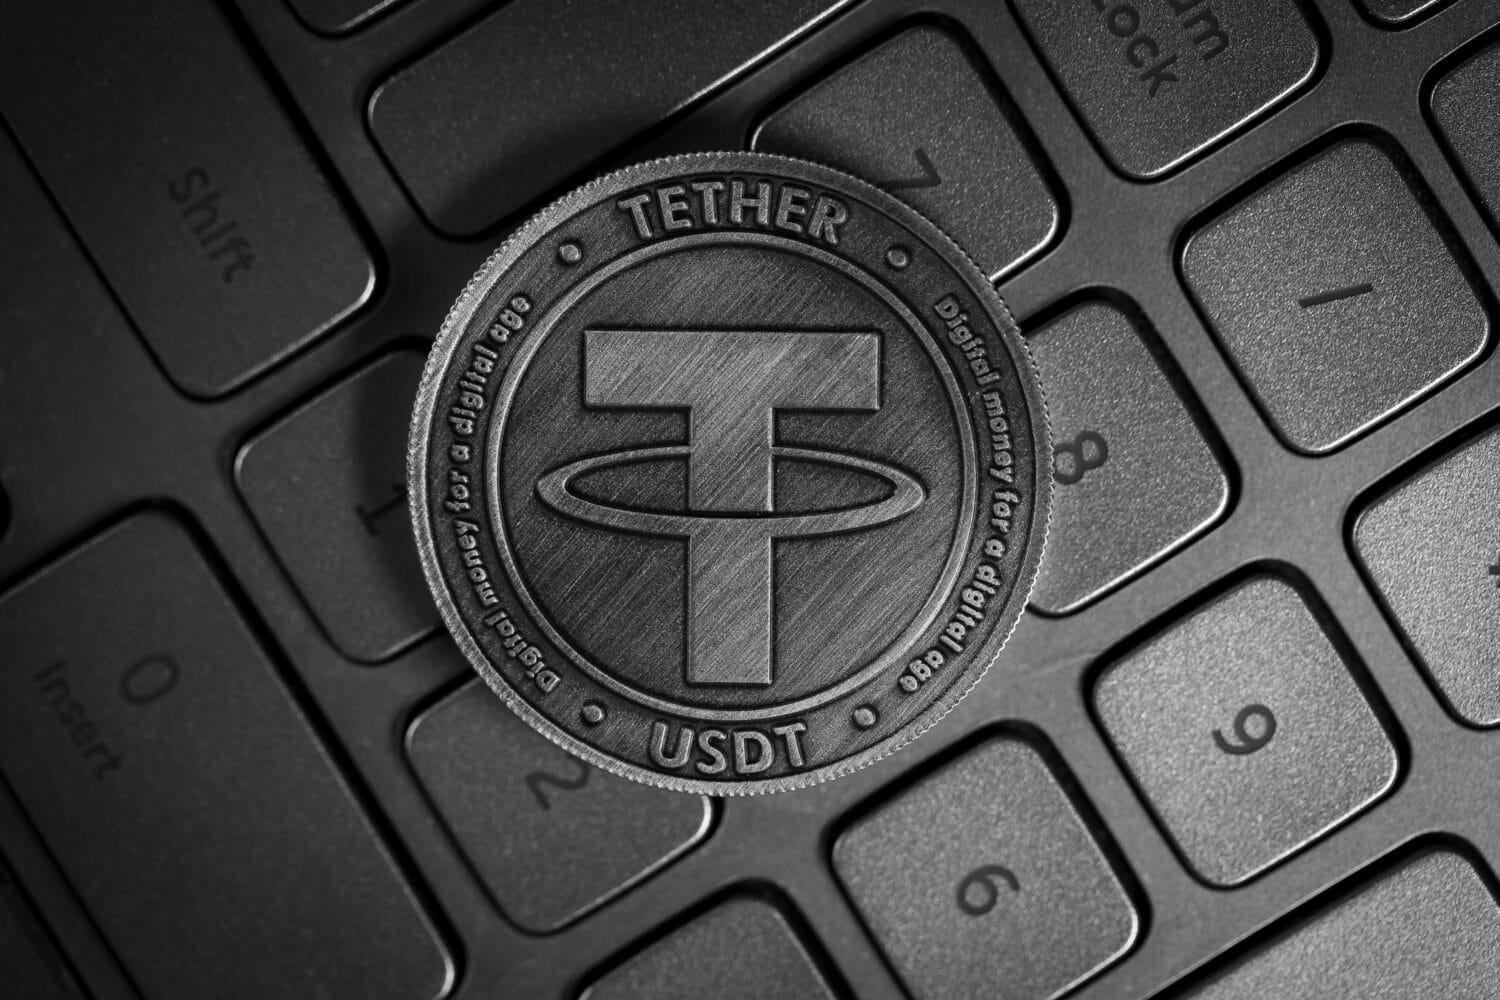 Tether USDT Cryptocurrency physical coin placed on computer keyboard